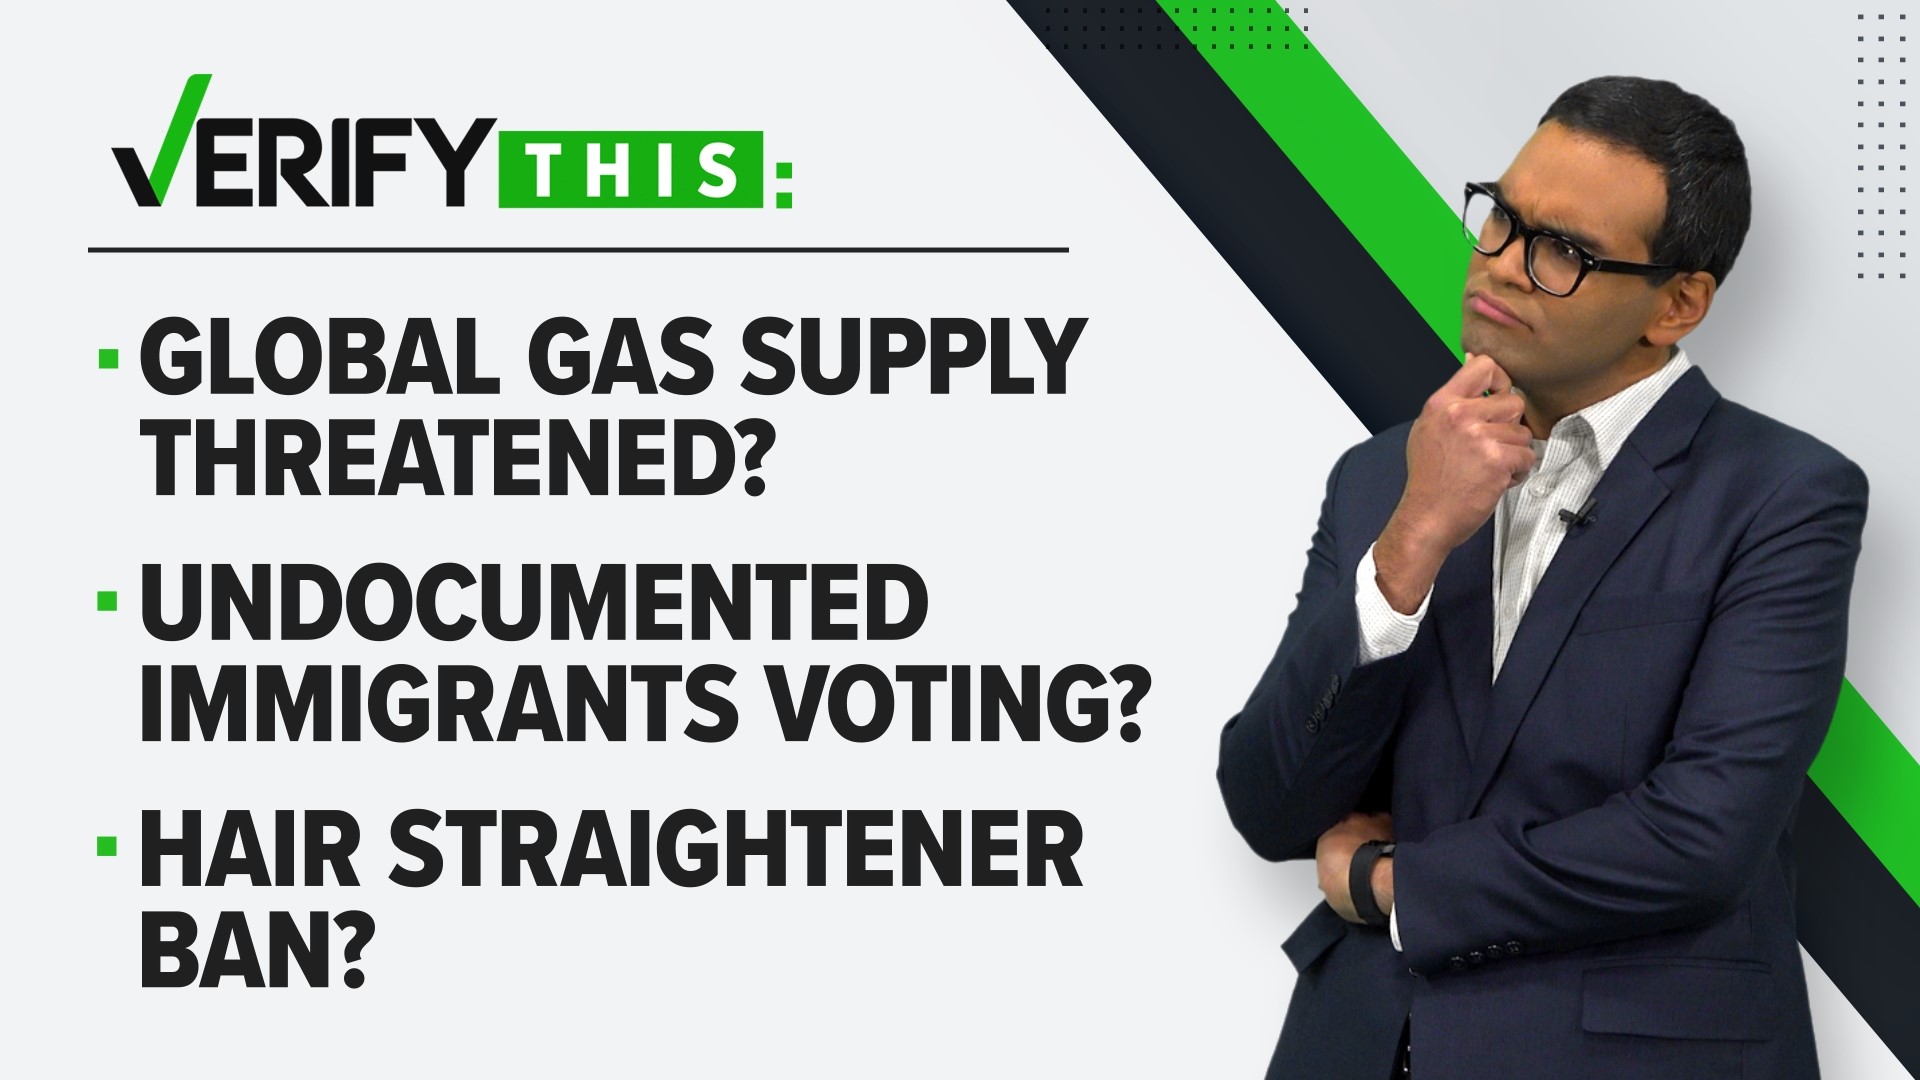 In this week's episode, we verify if the global gas supply is being threatened, whether there's a ban on hair straighteners and demystify some Halloween myths.